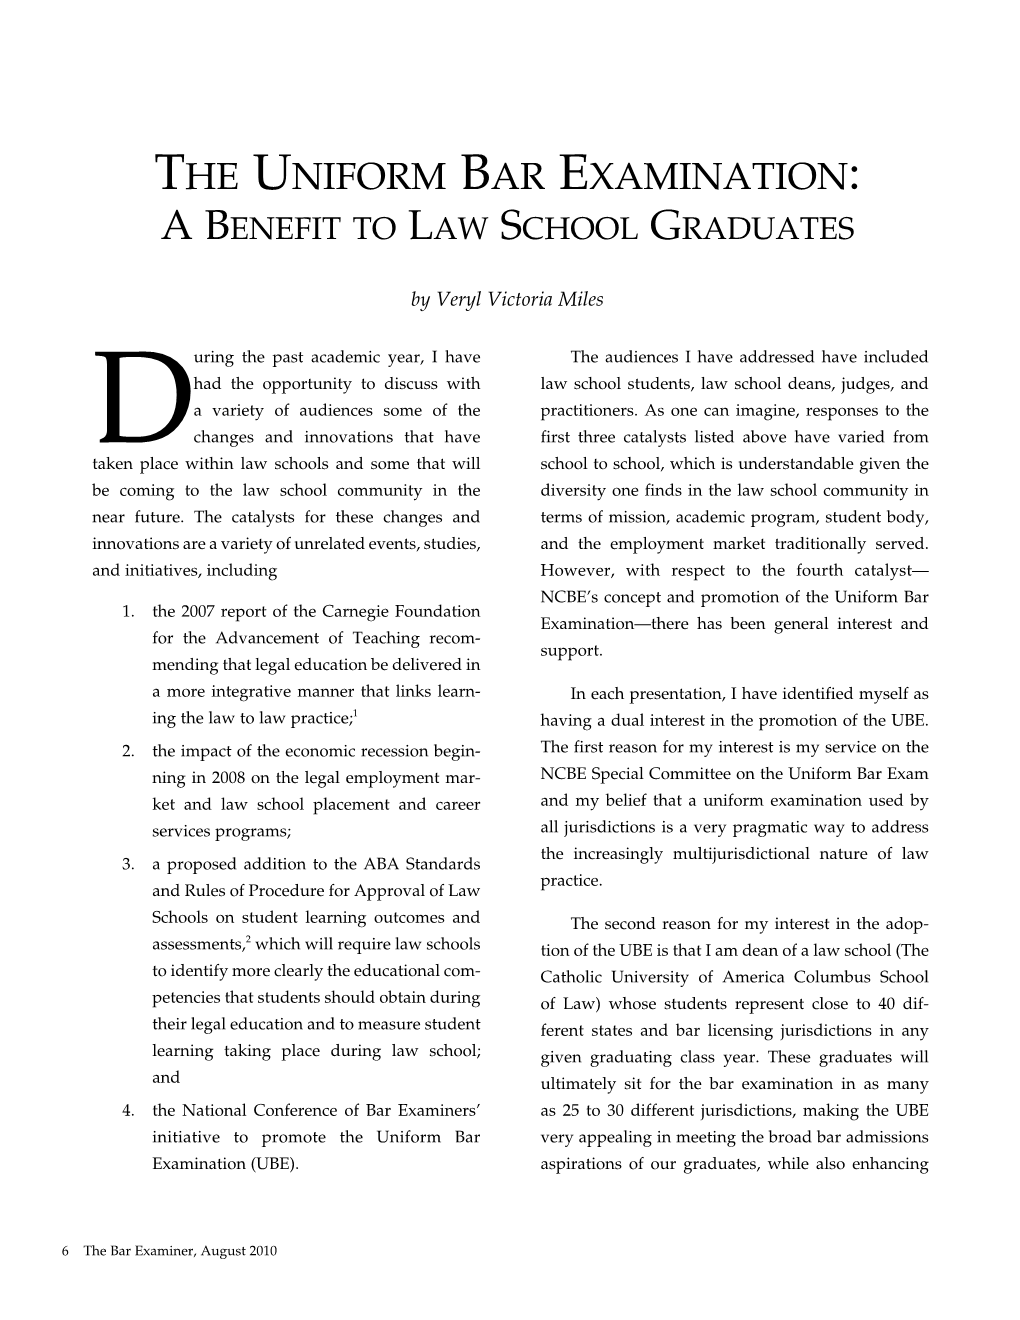 The Uniform Bar Examination: a Benefit to Law School Graduates 7 to Assess These Competencies